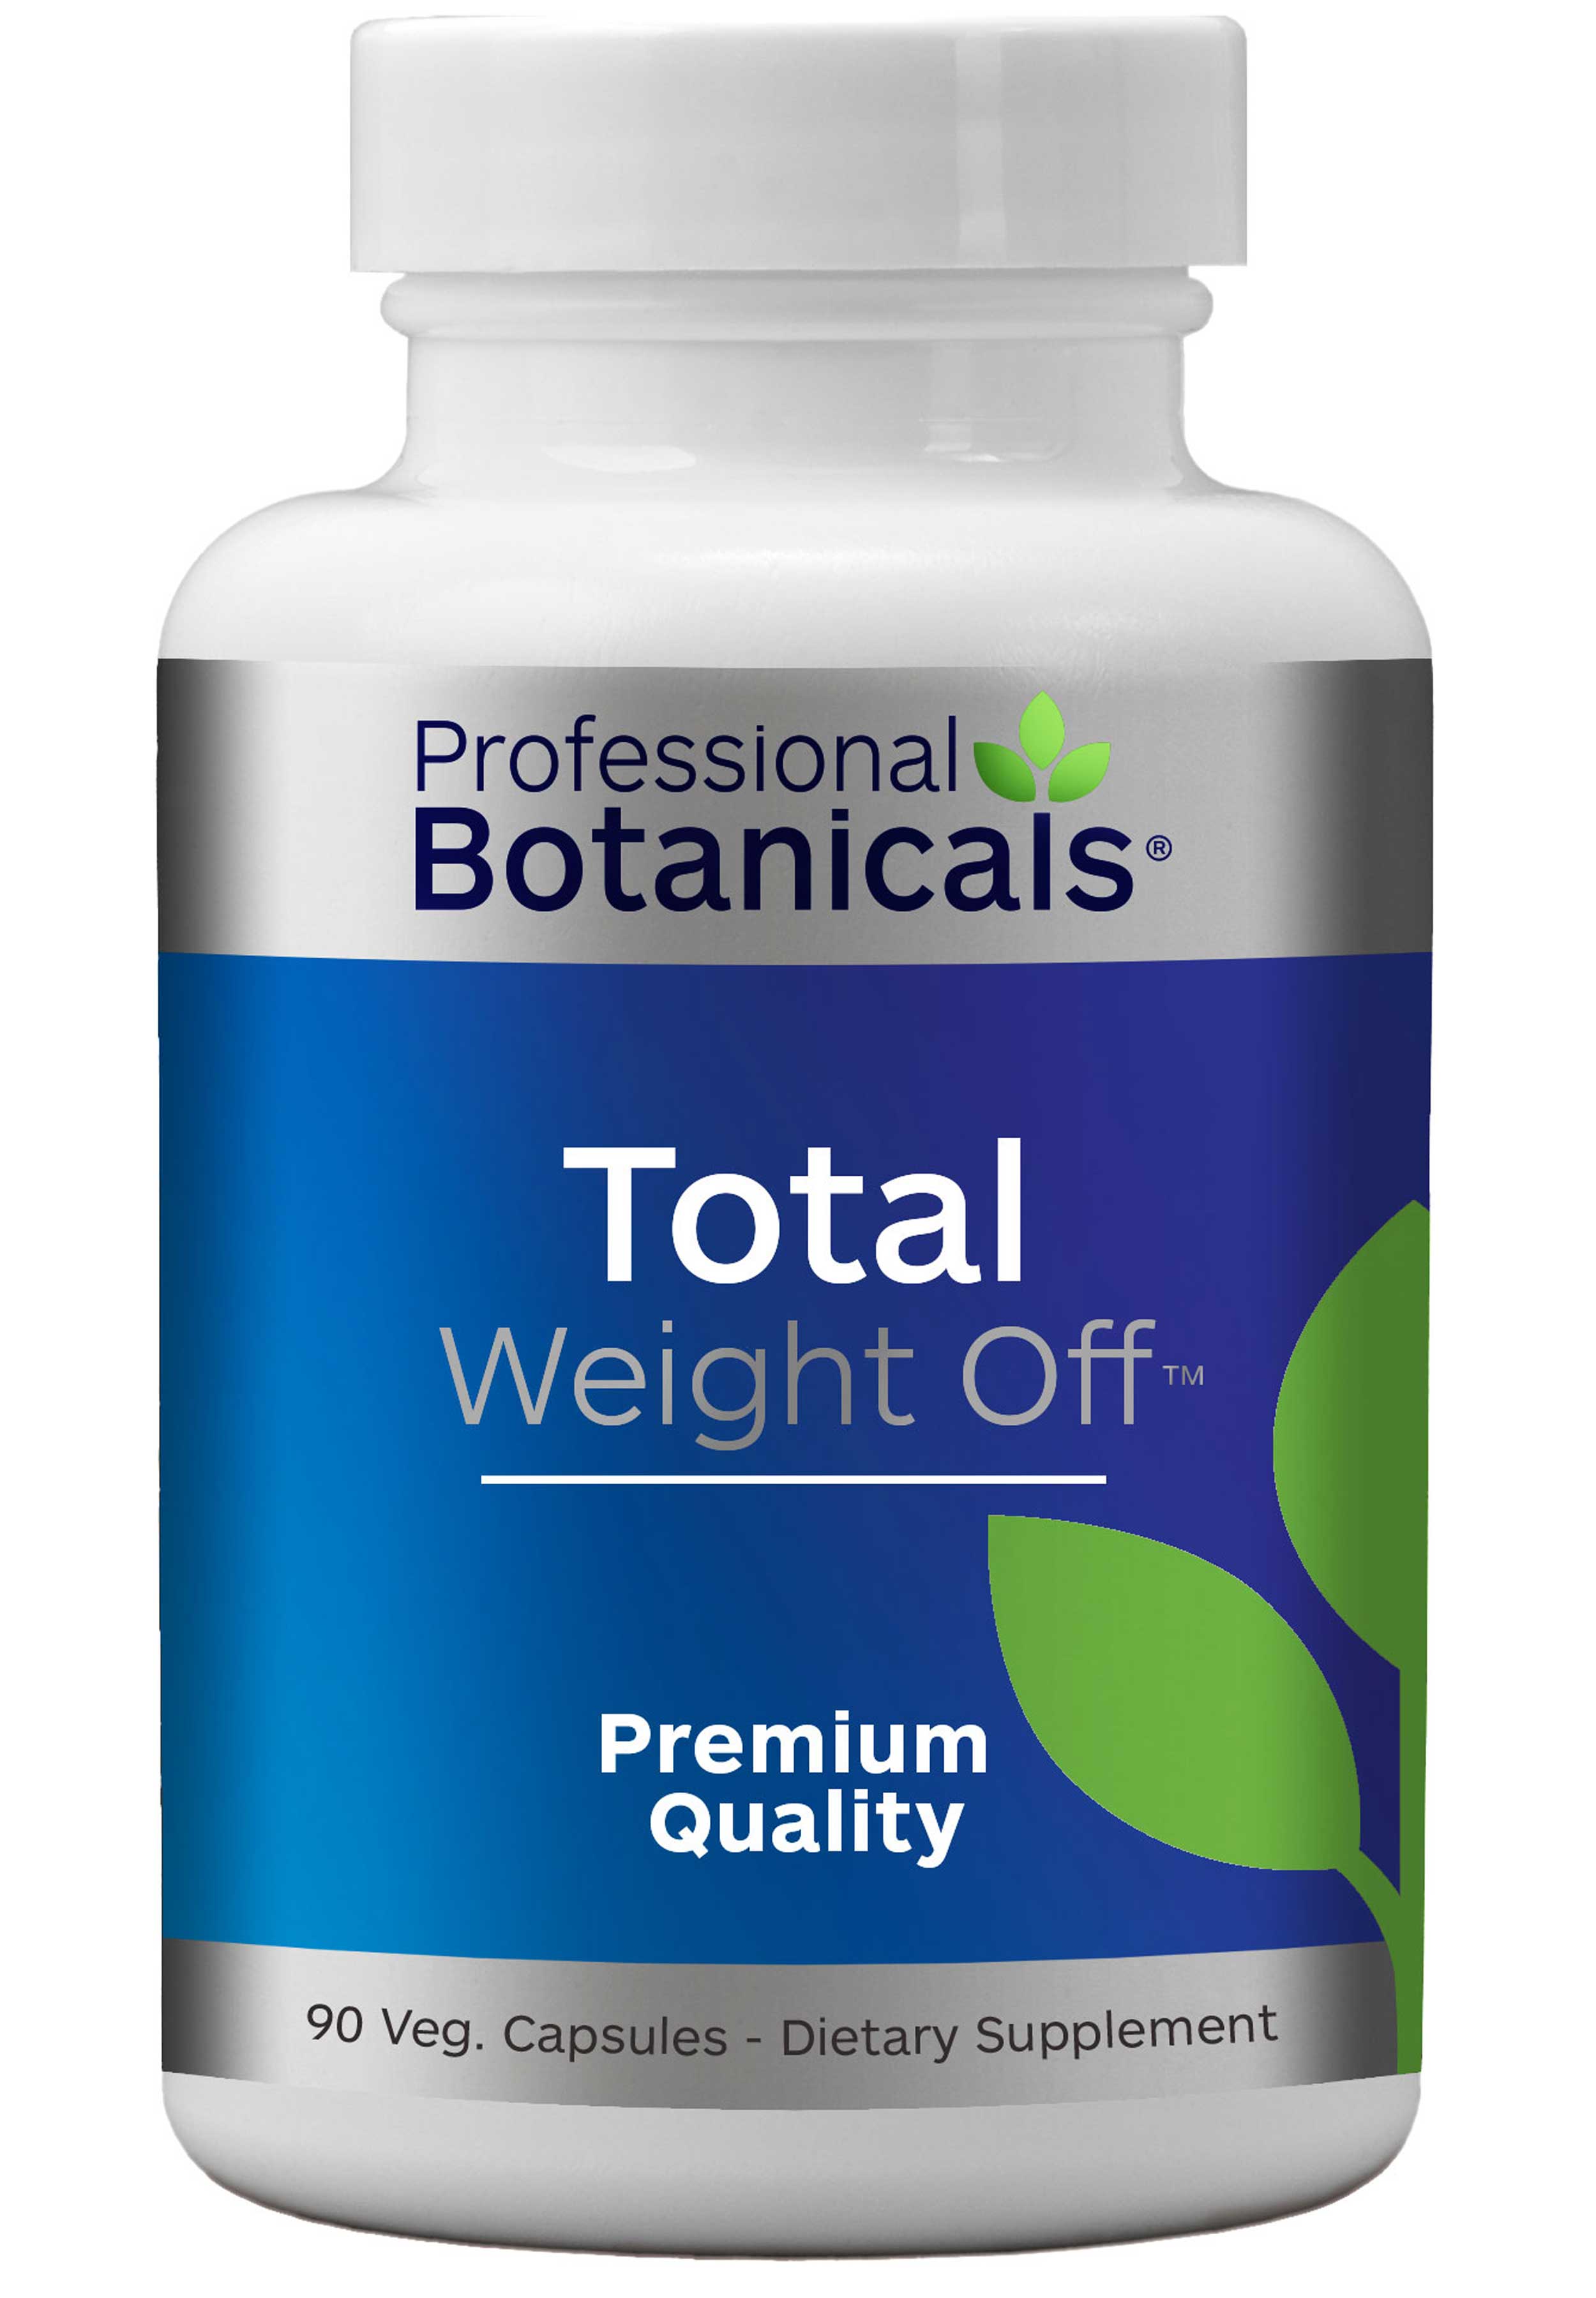 Professional Botanicals Total Weight Off